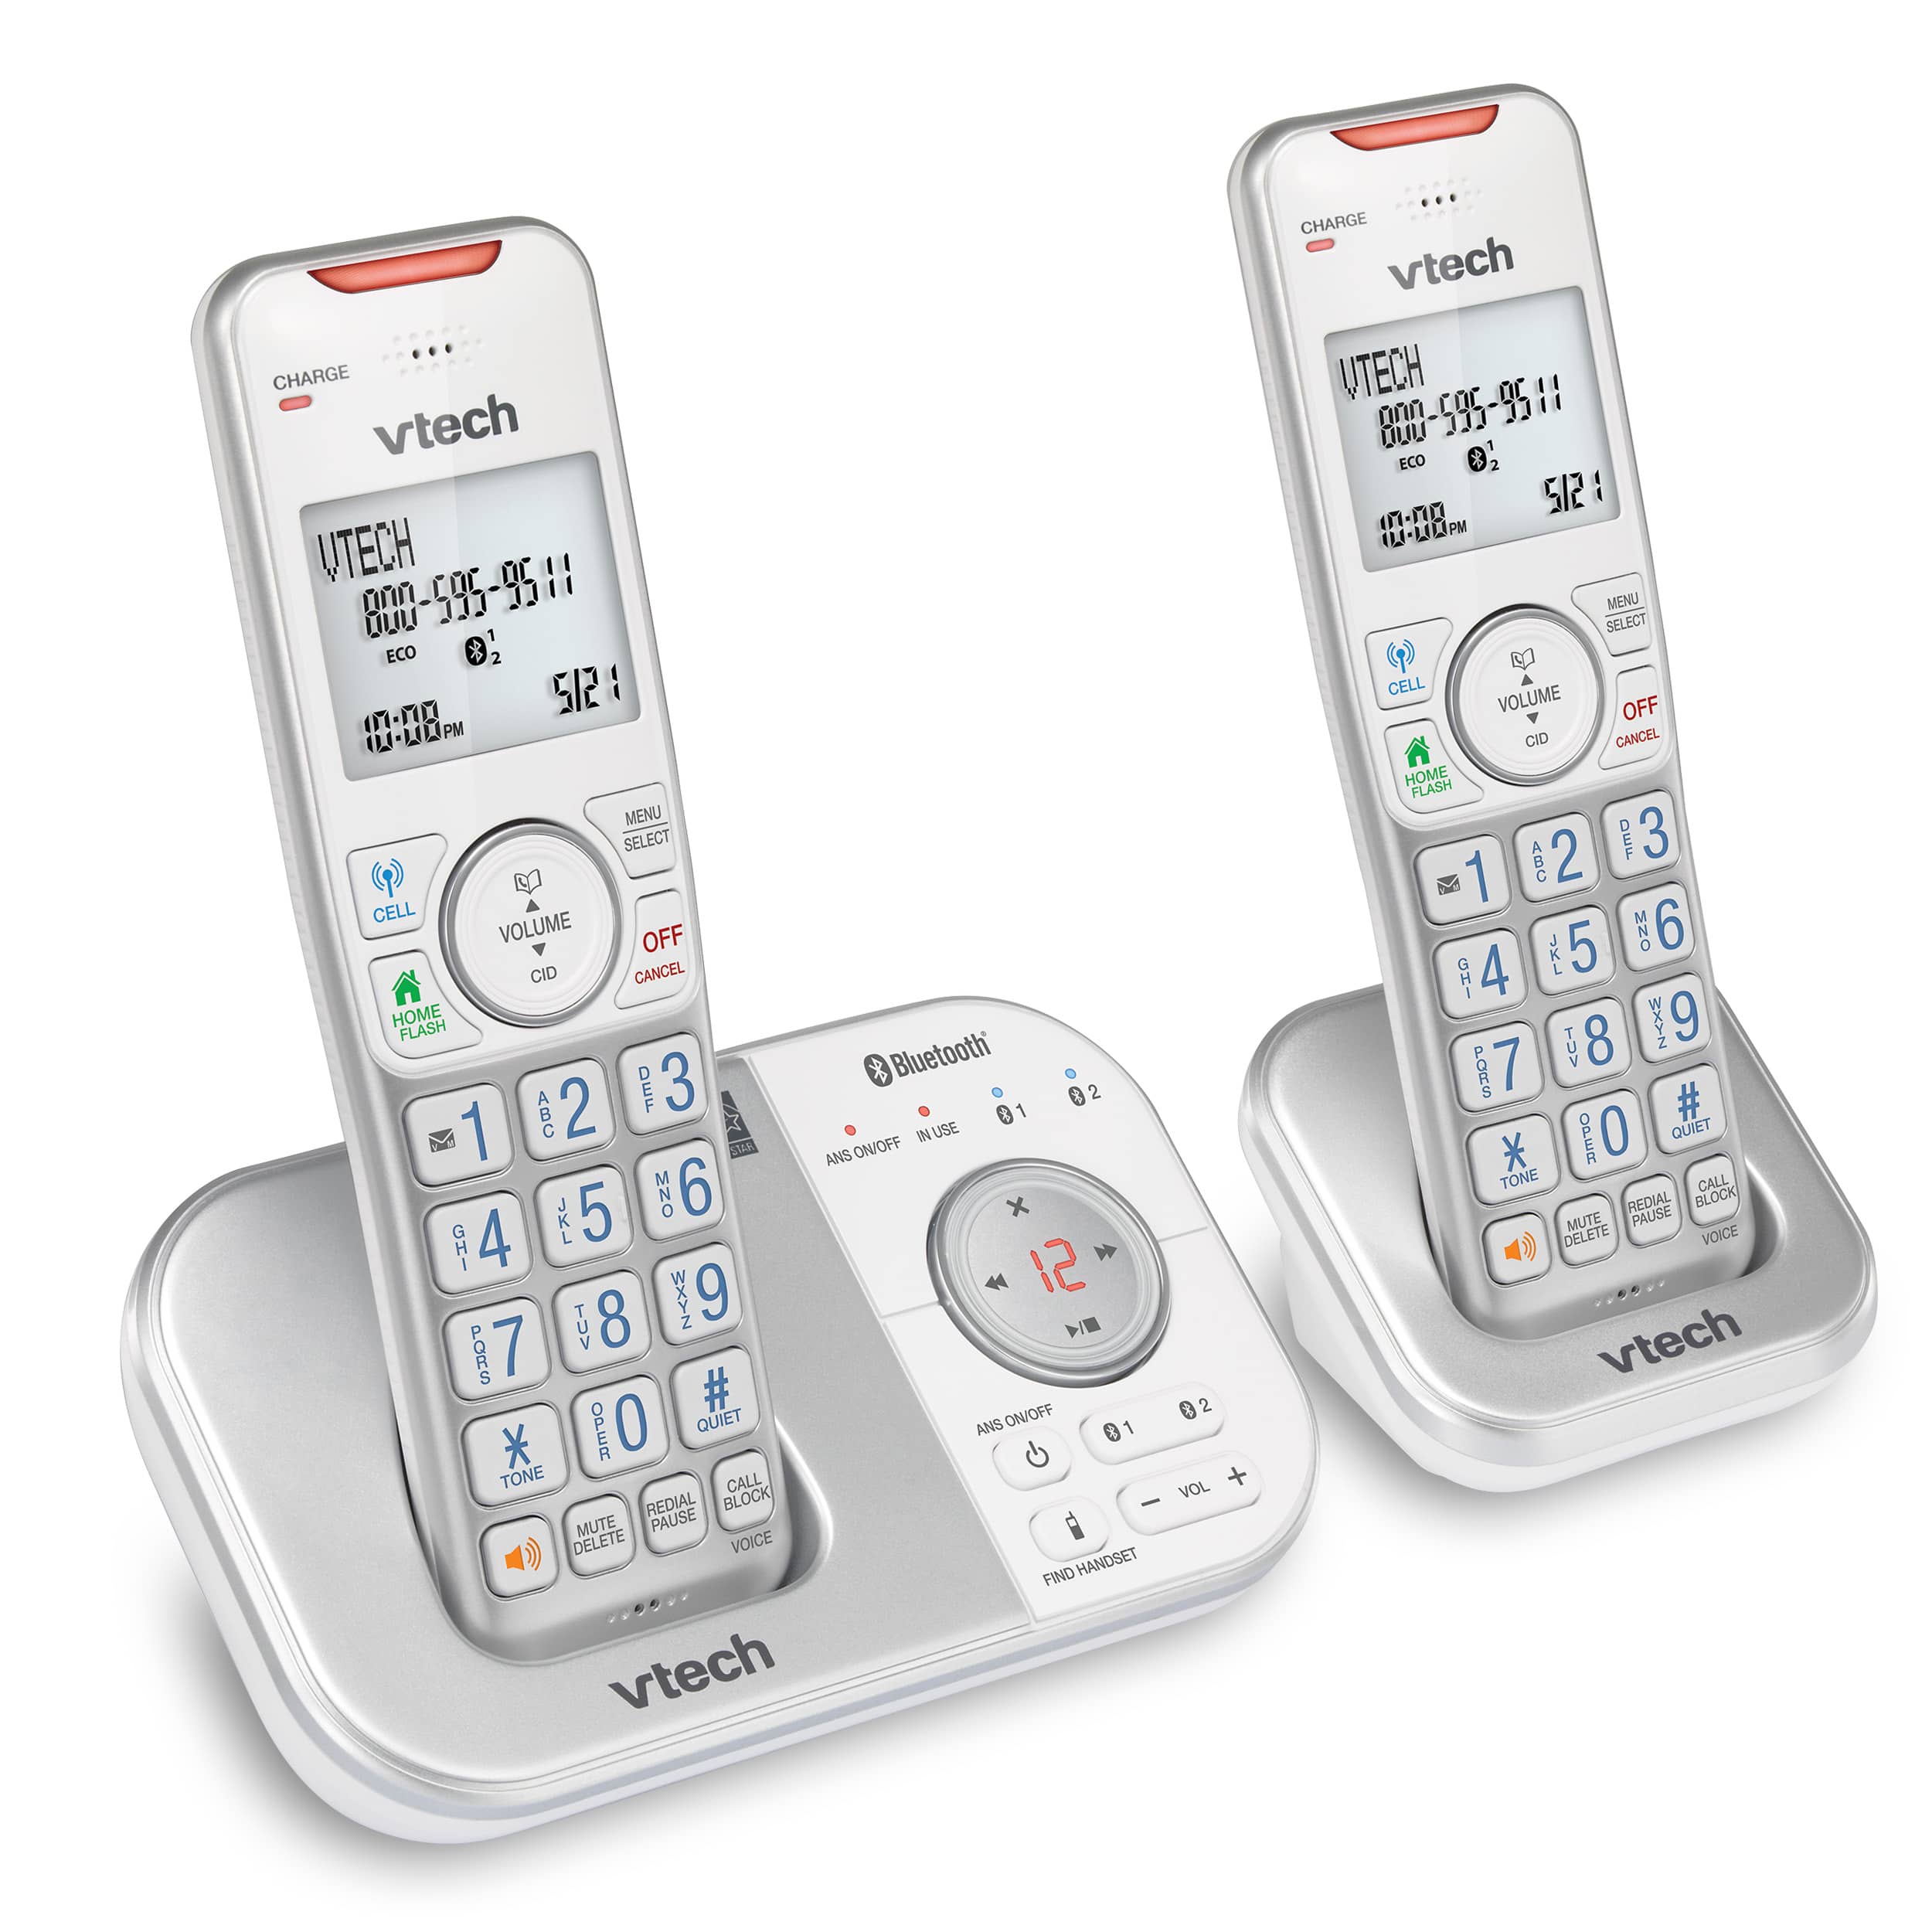 Silver & White Call Blocking Caller ID Renewed Intercom and Connect to Cell VTech VS112-27 DECT 6.0 Bluetooth 2 Handset Cordless Phone for Home with Answering Machine 